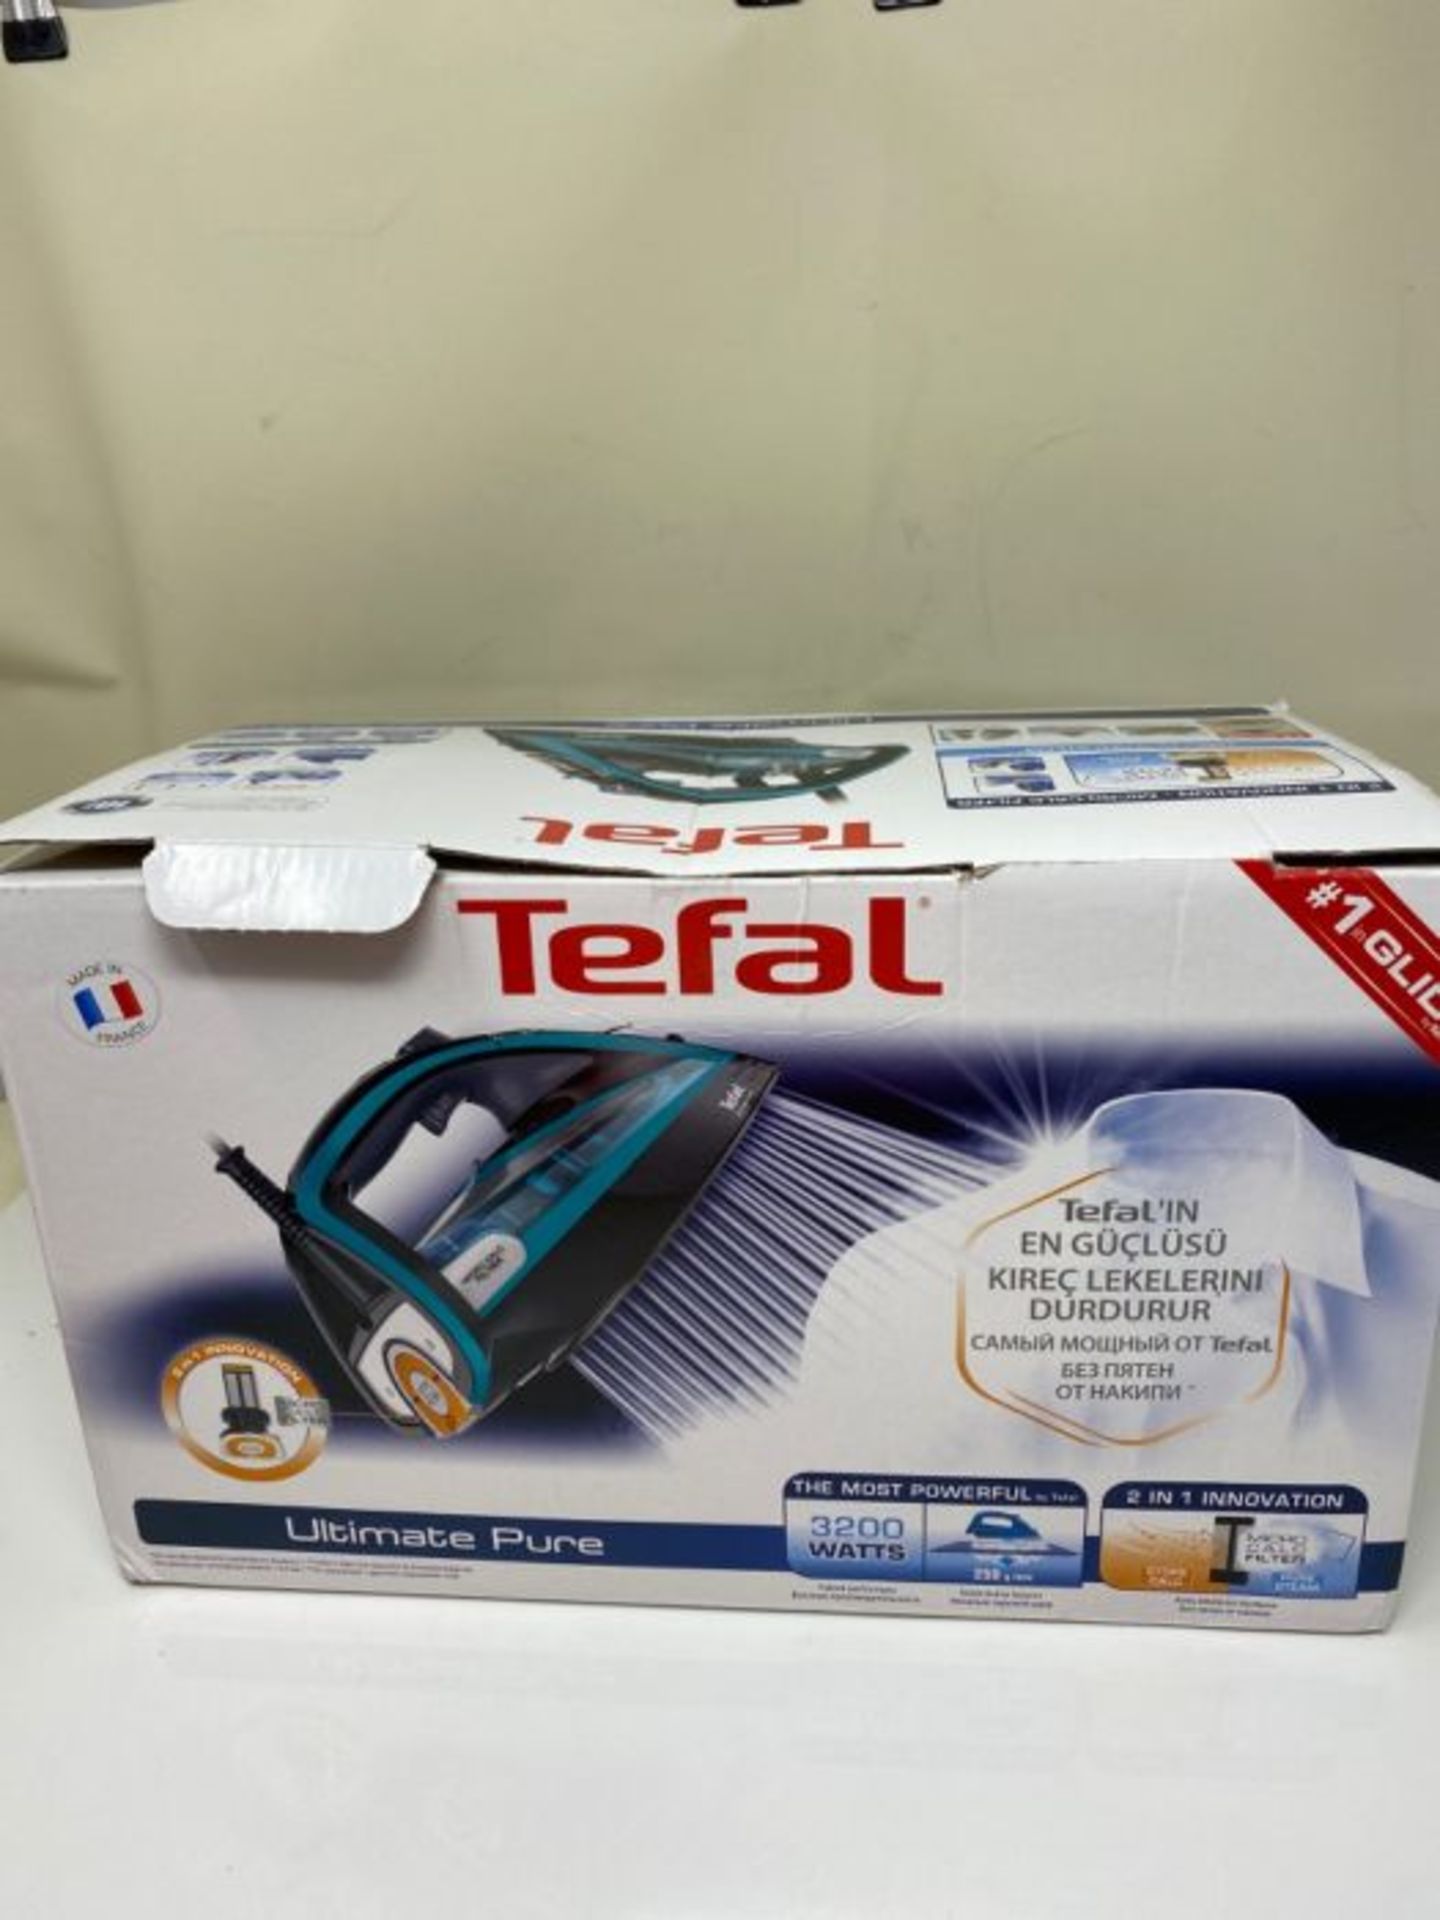 RRP £199.00 Tefal Ultimate Pure FV9844 Iron Dry and steam iron Durilium Autoclean soleBlack,Blue 3 - Image 2 of 3